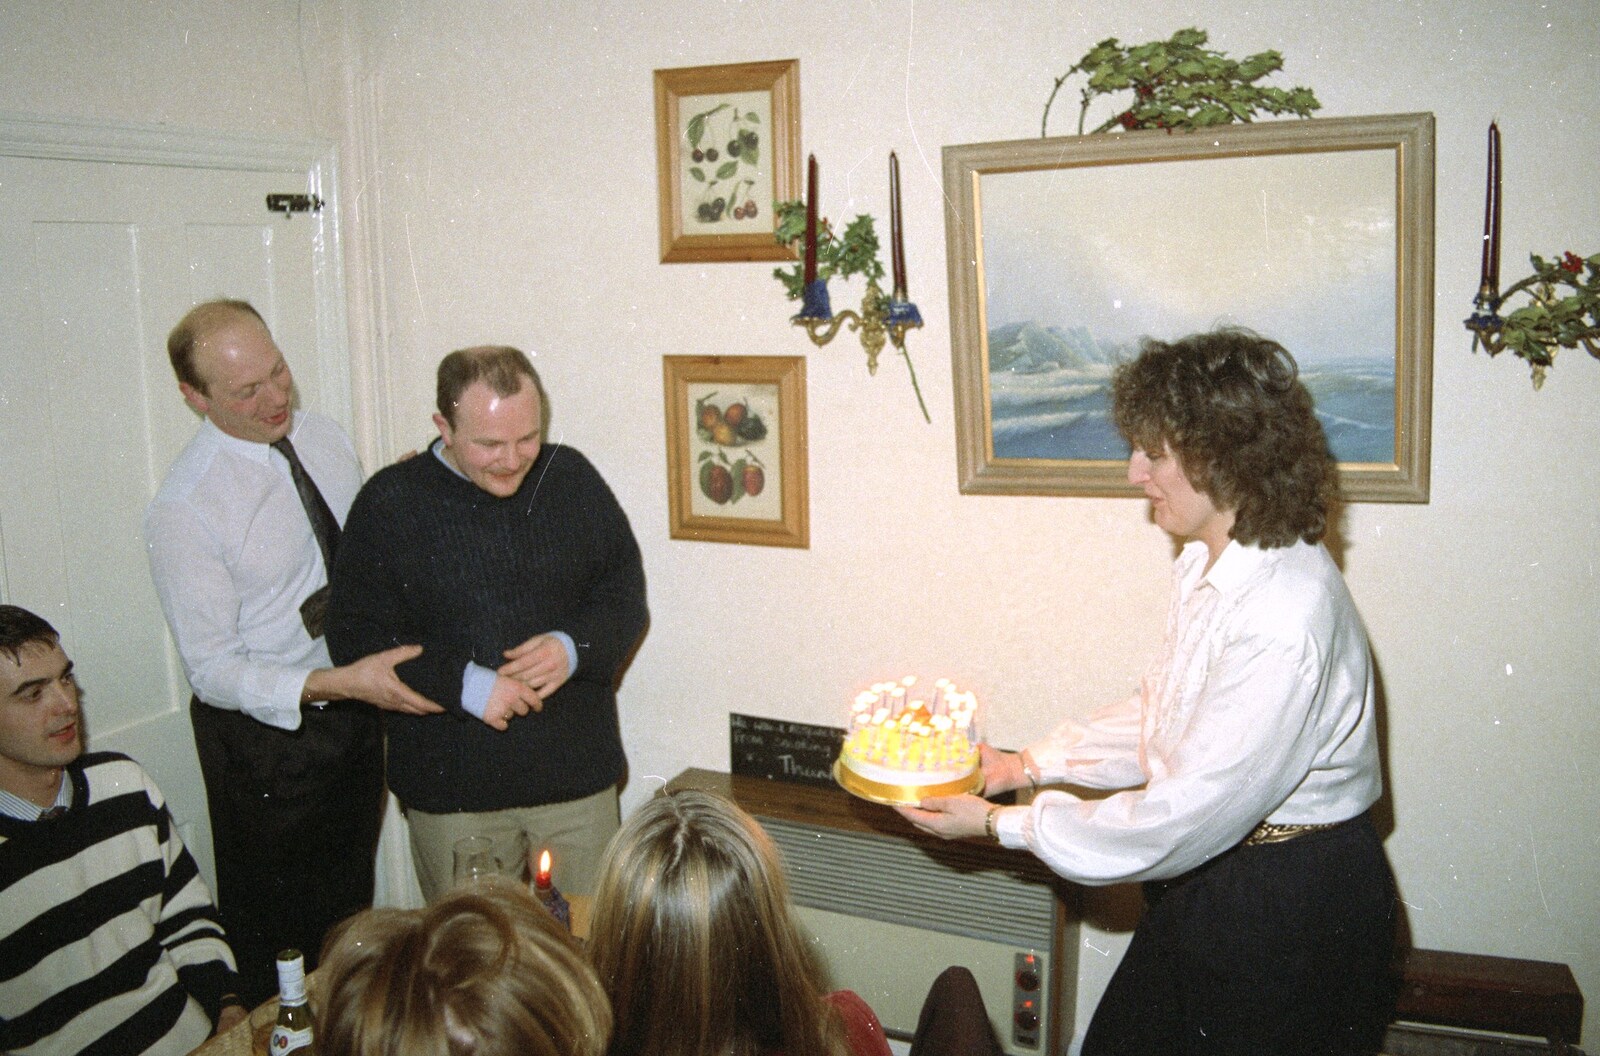 The cake is brought in from Hamish's Thirtieth Birthday, Hare and Hounds, Sway, Hampshire - 19th December 1996